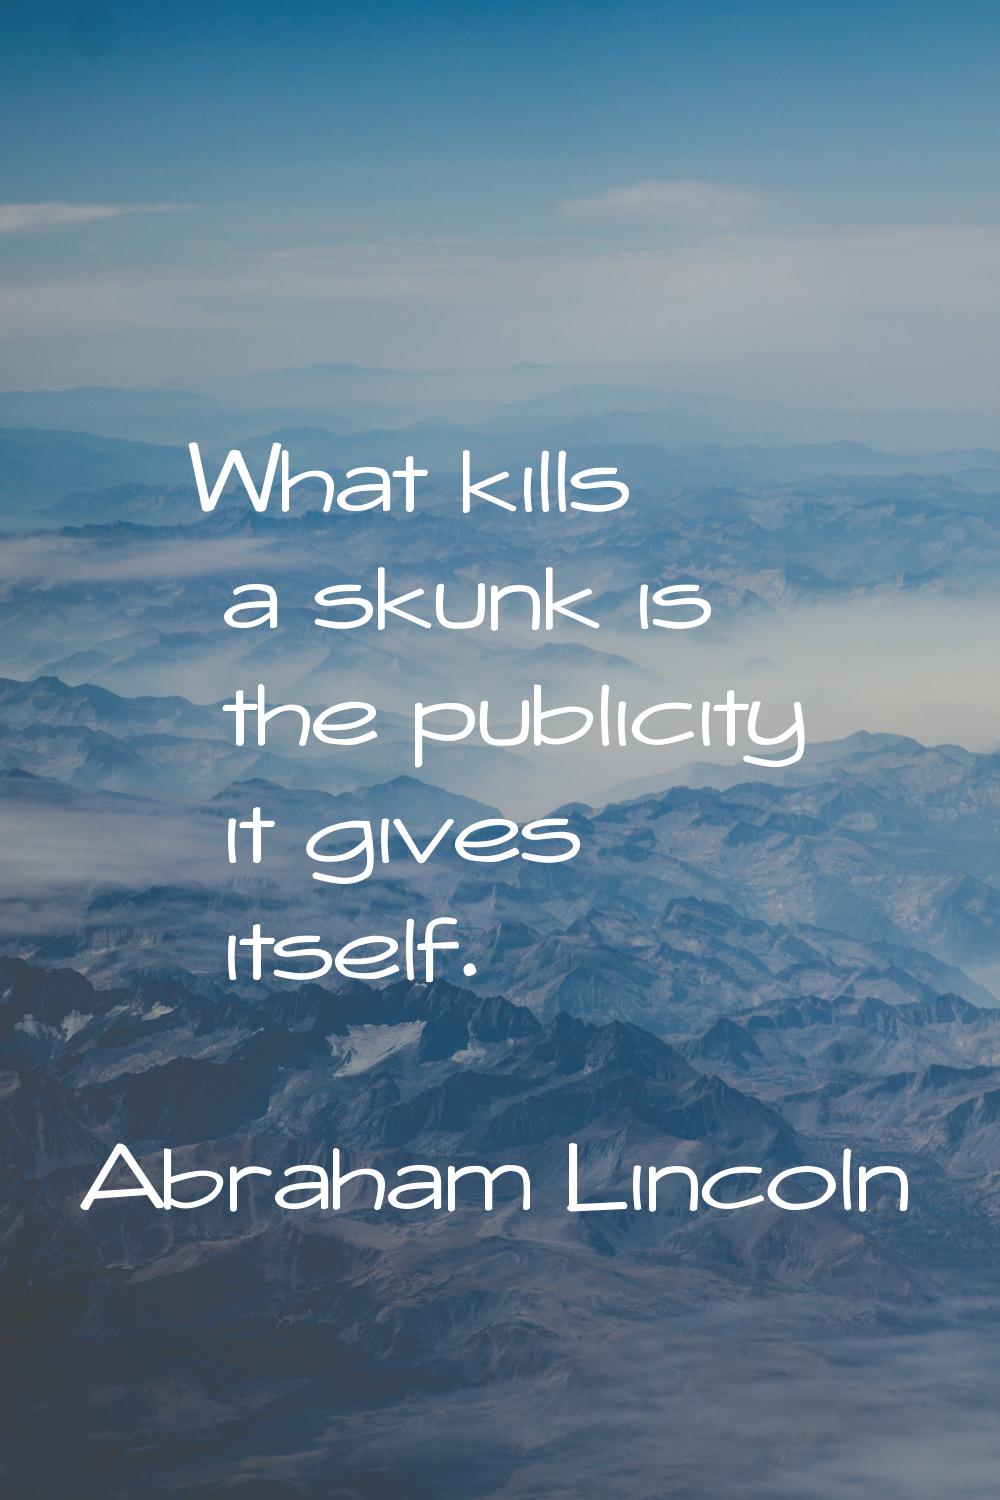 What kills a skunk is the publicity it gives itself.